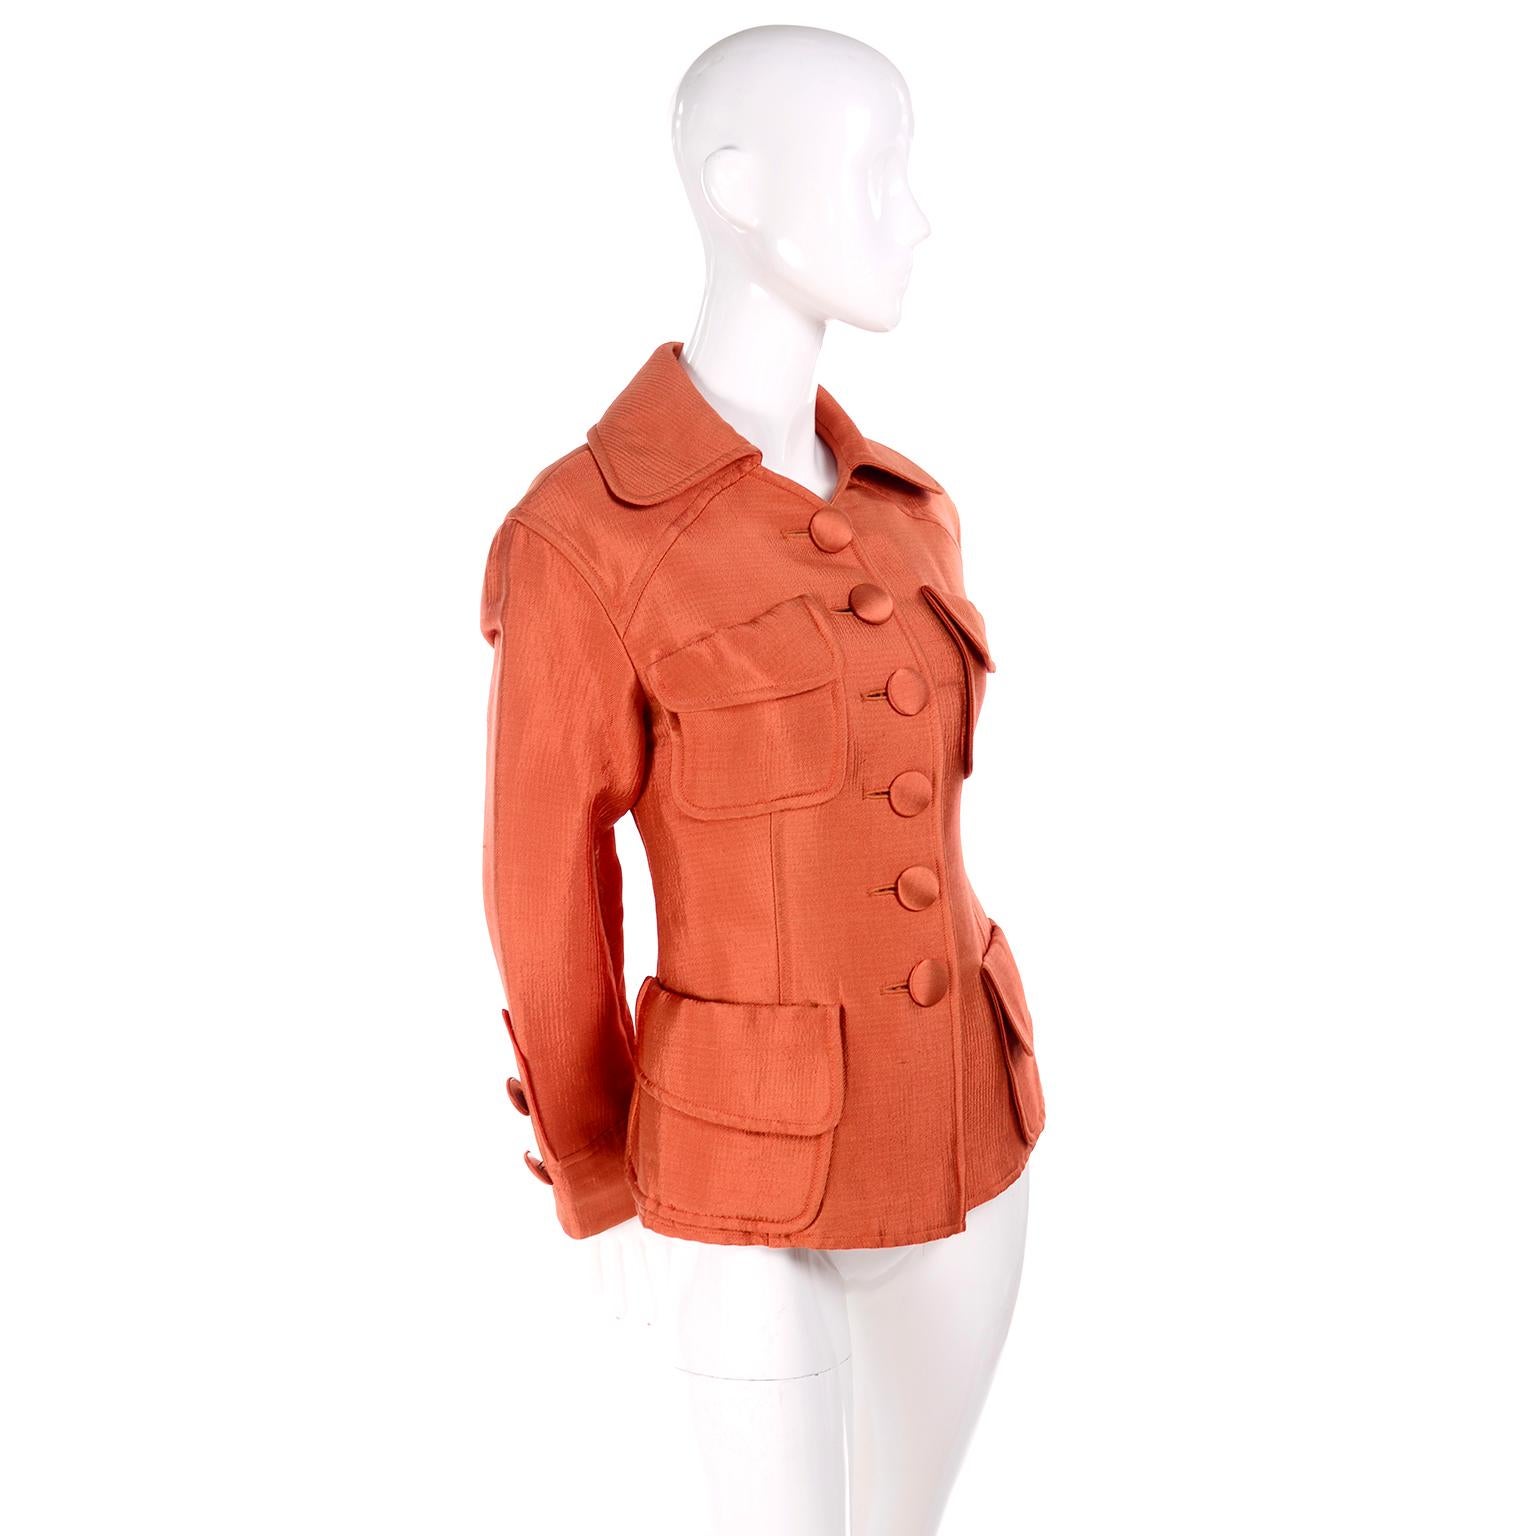 This is a fabulous vintage rich orange jacket from Christian Lacroix. The jacket has 4 front pockets and buttons up the front. This fitted jacket is labeled a size 40 and we estimate it to fit a modern day size 4 or Small. The color is a rich